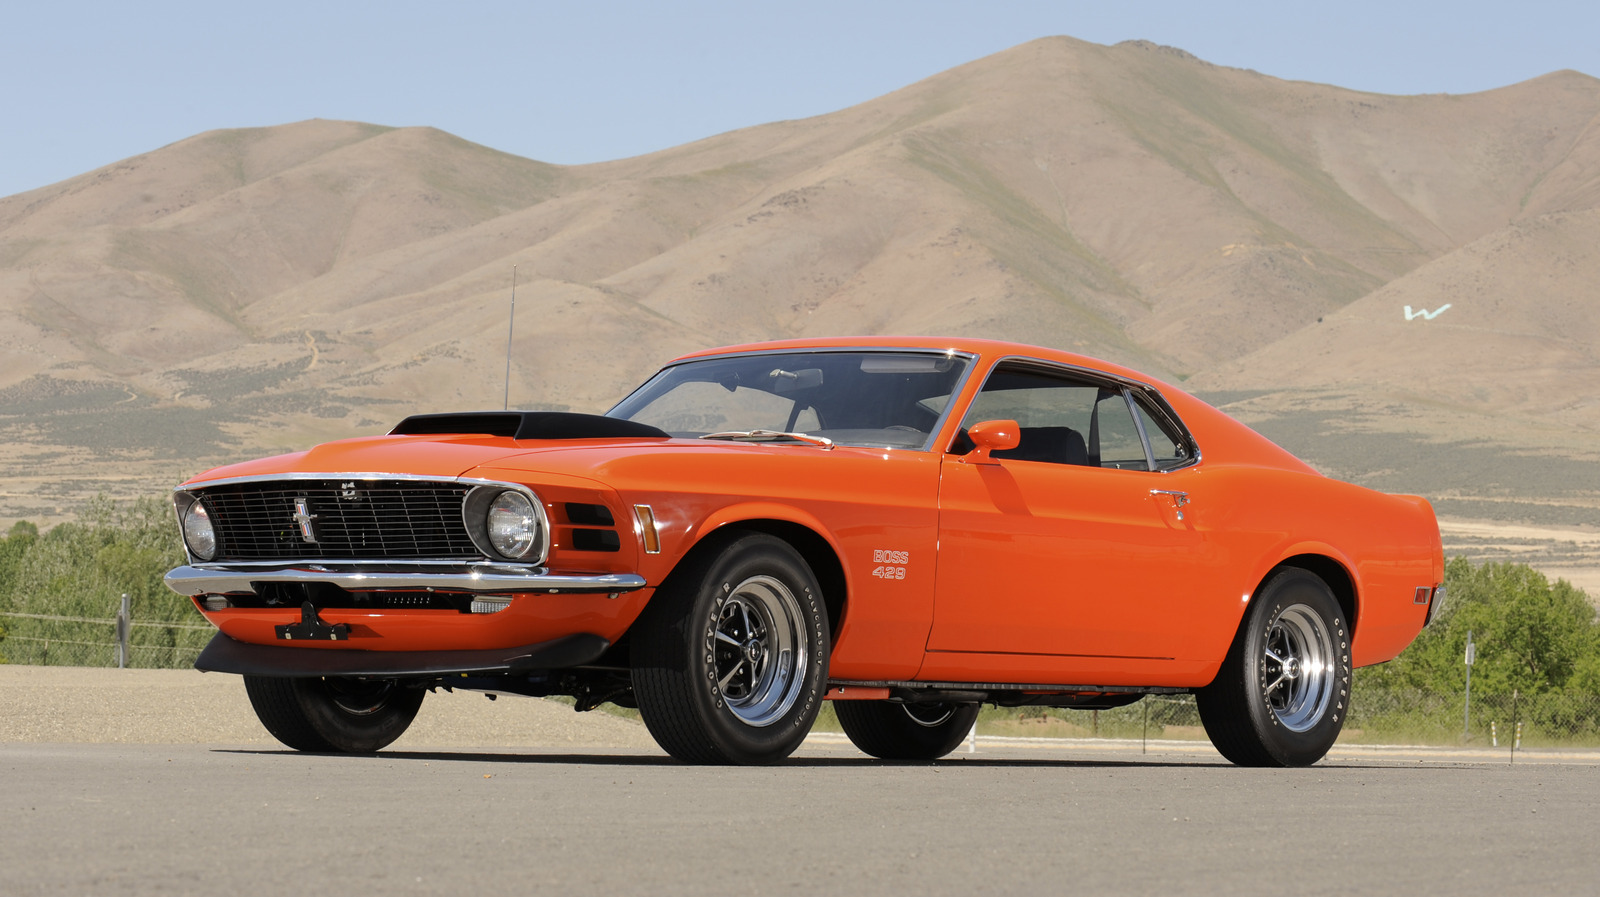 10 Interesting Facts About The 1969 Ford Mustang Boss 429